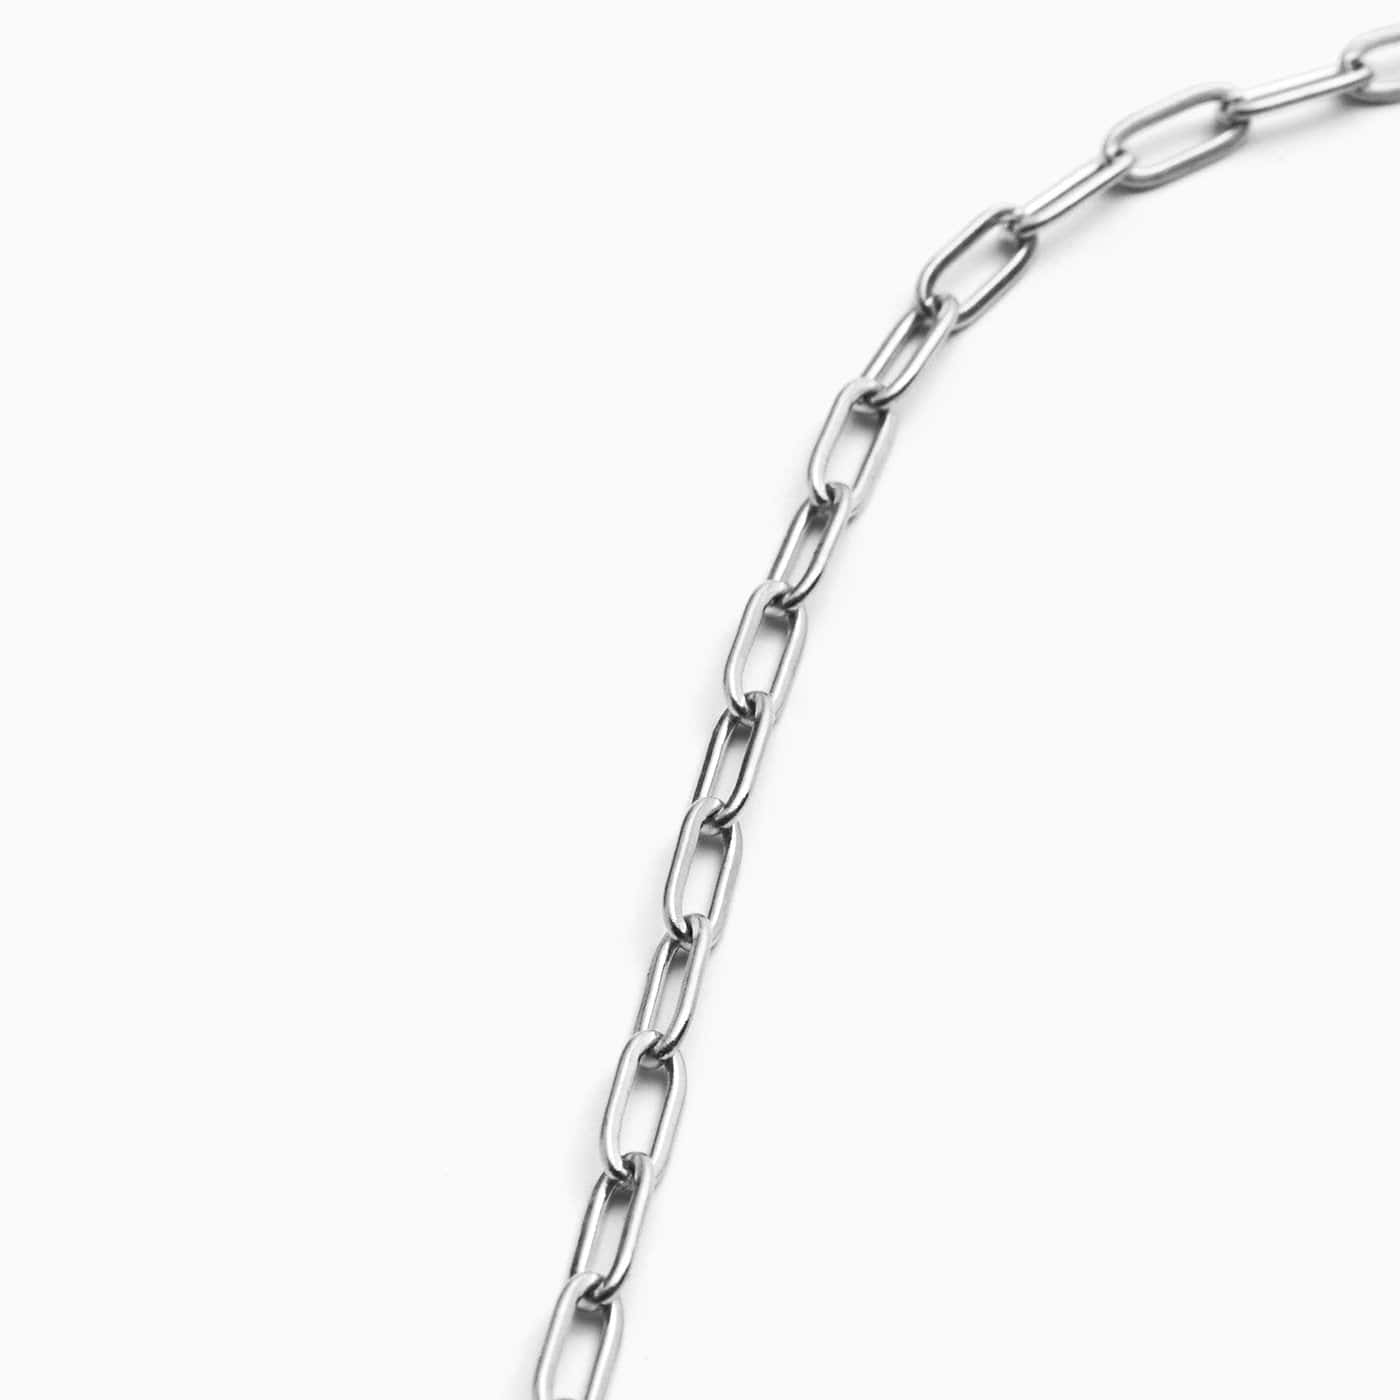 Necklace Chain Silver